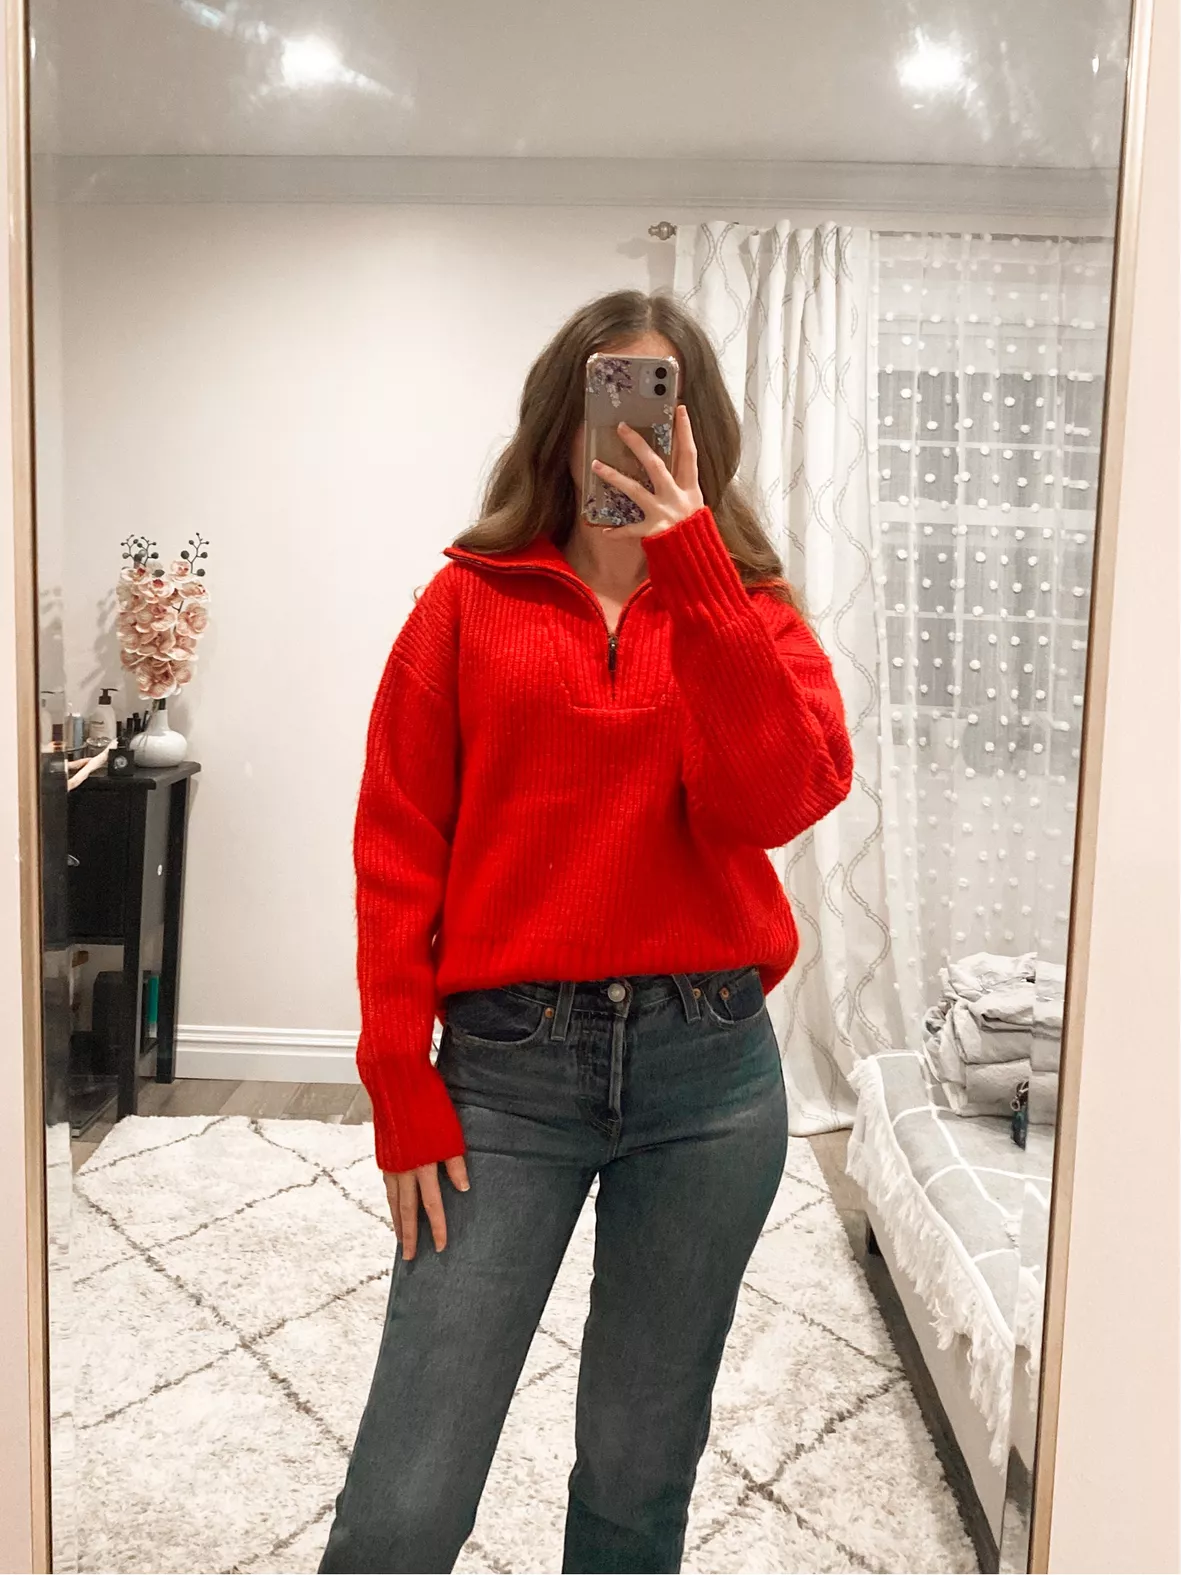 Outfits in Real Life: A Cute Sweater and Jeans Outfit